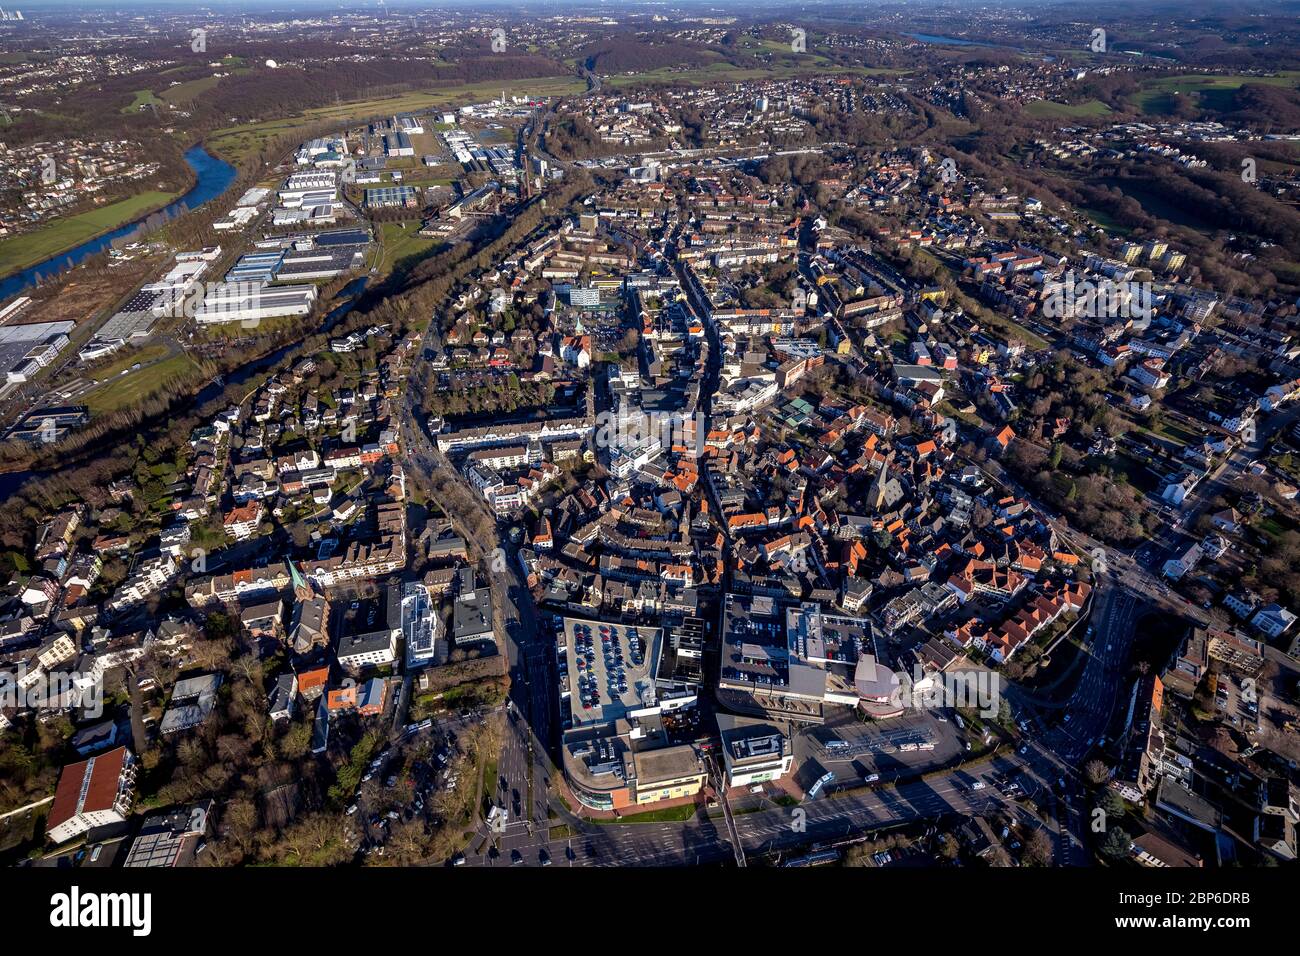 Aerial view, city view and downtown area of Hattingen, Ruhr river, Hattingen, Ennepe-Ruhr district, Ruhr area, North Rhine-Westphalia, Germany Stock Photo